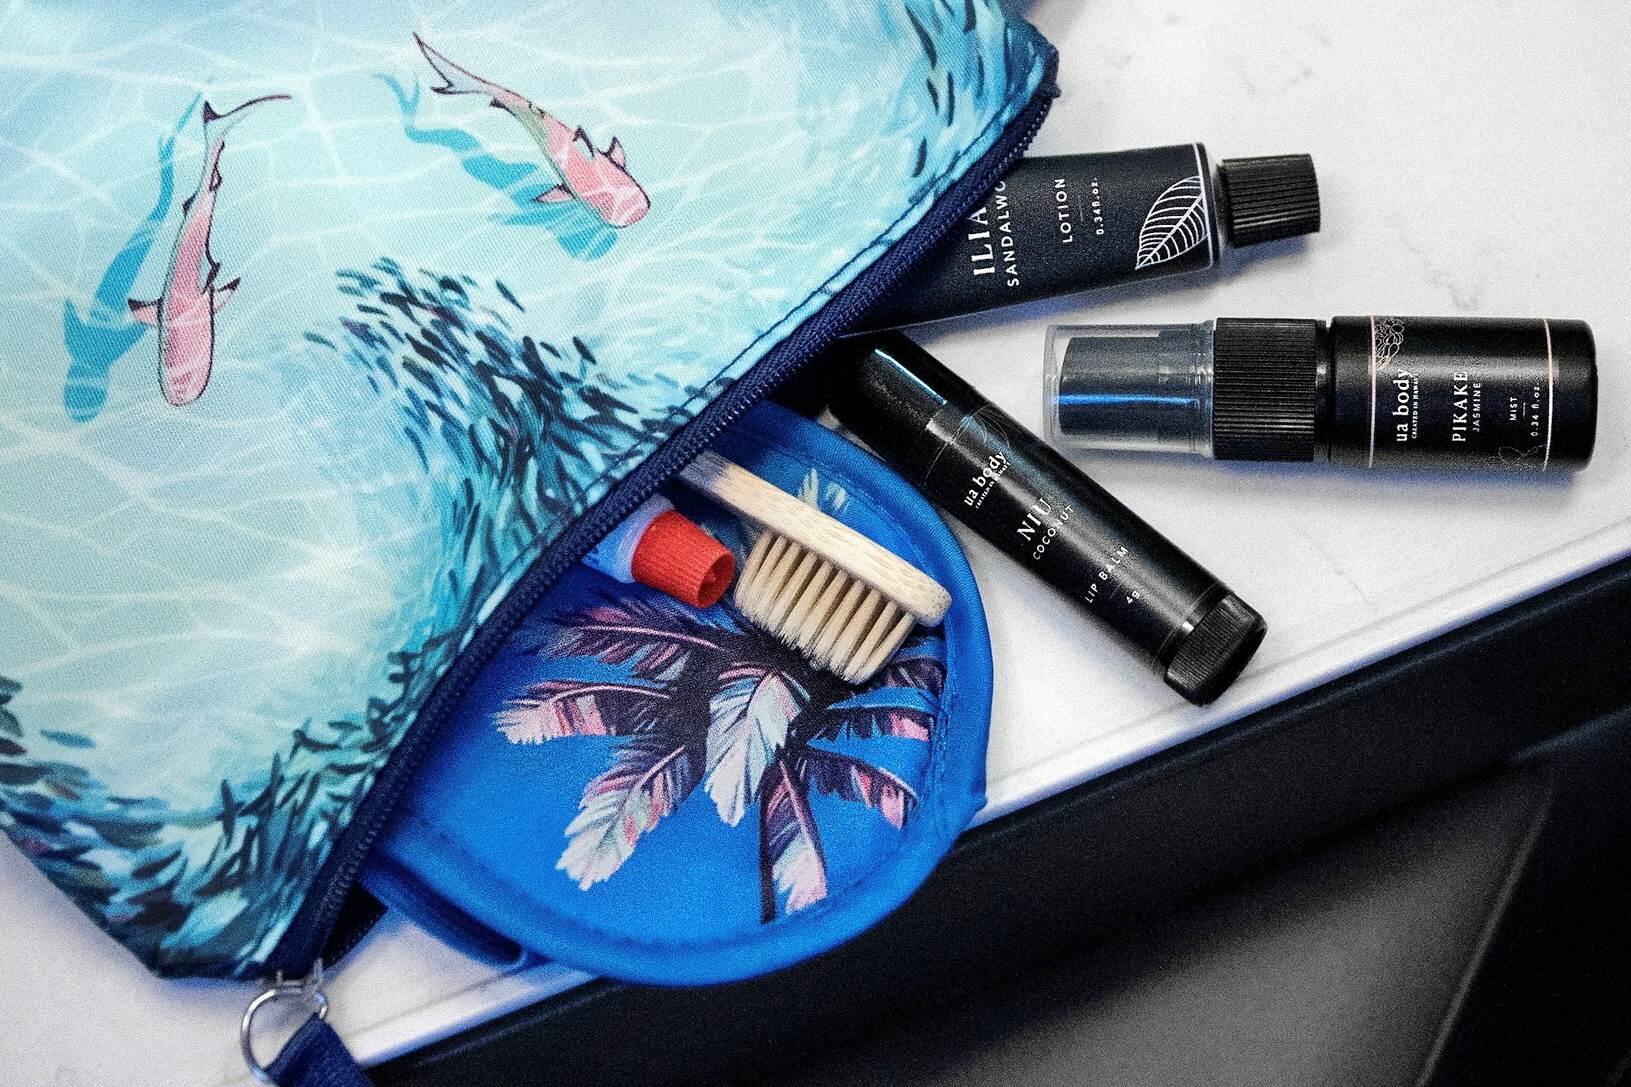 United First's new amenity kits with skincare from Hawaiian brand Ua Body. Click to enlarge.